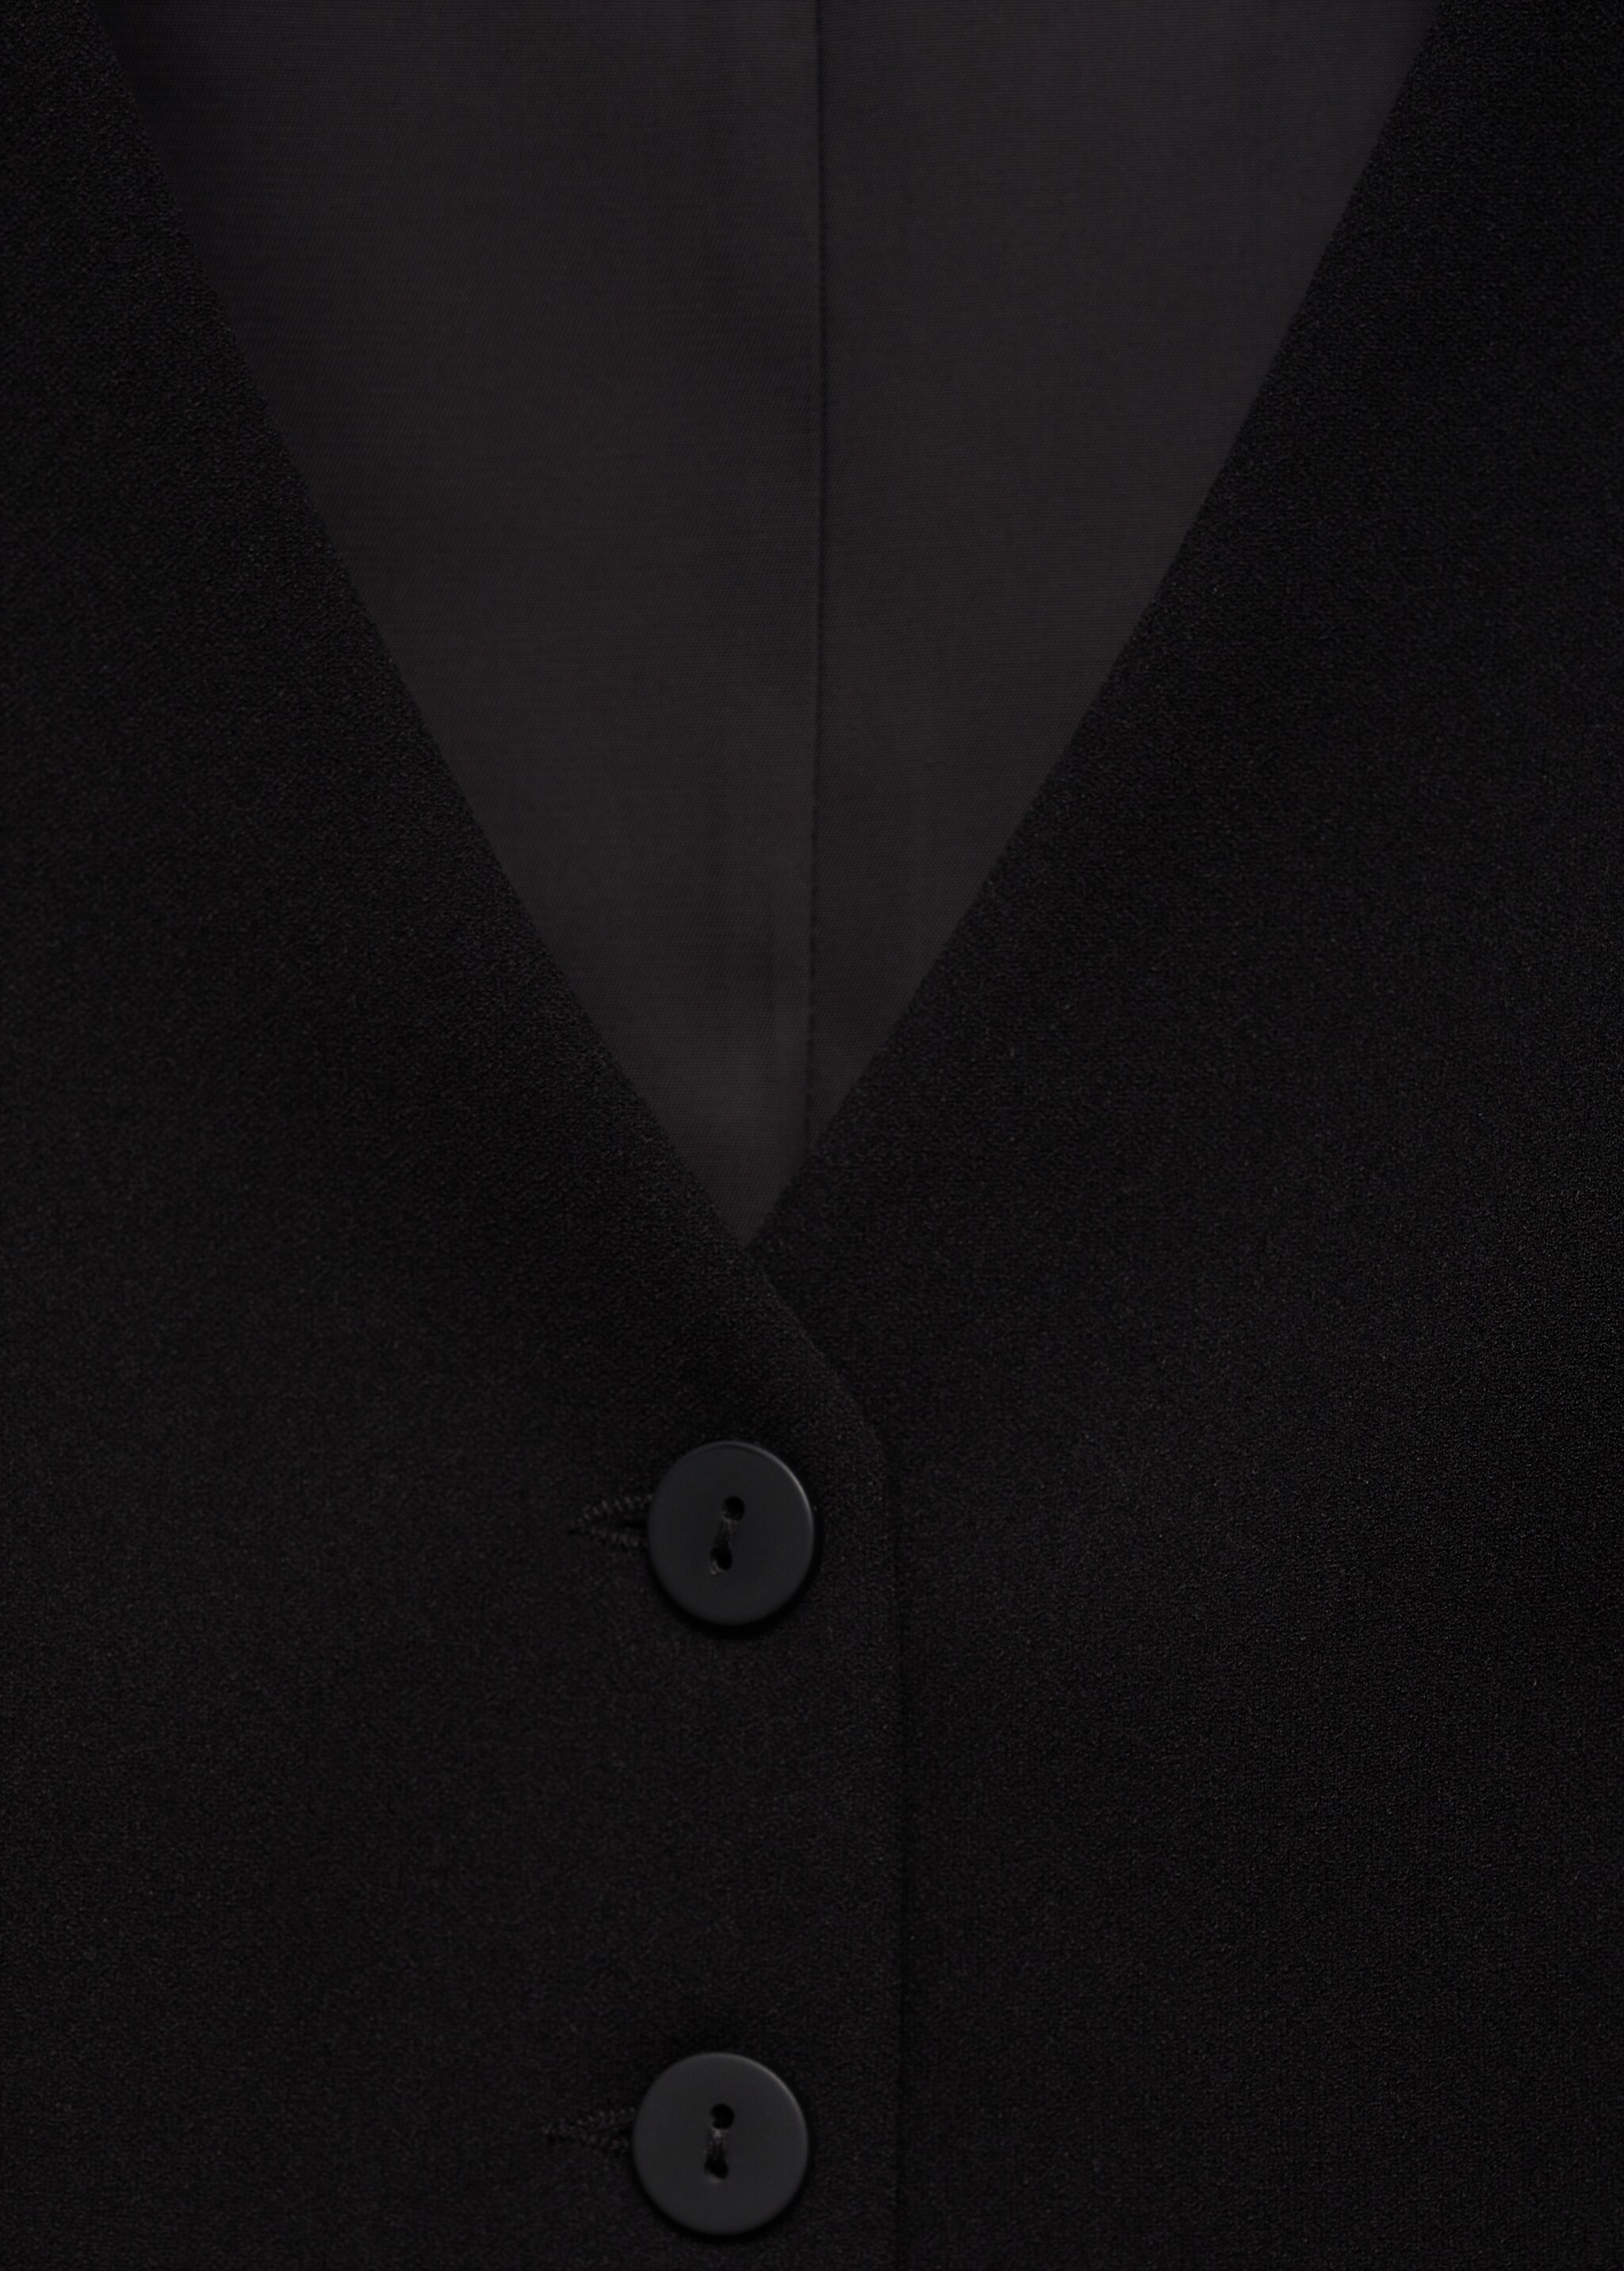 Suit waistcoat with buttons - Details of the article 8